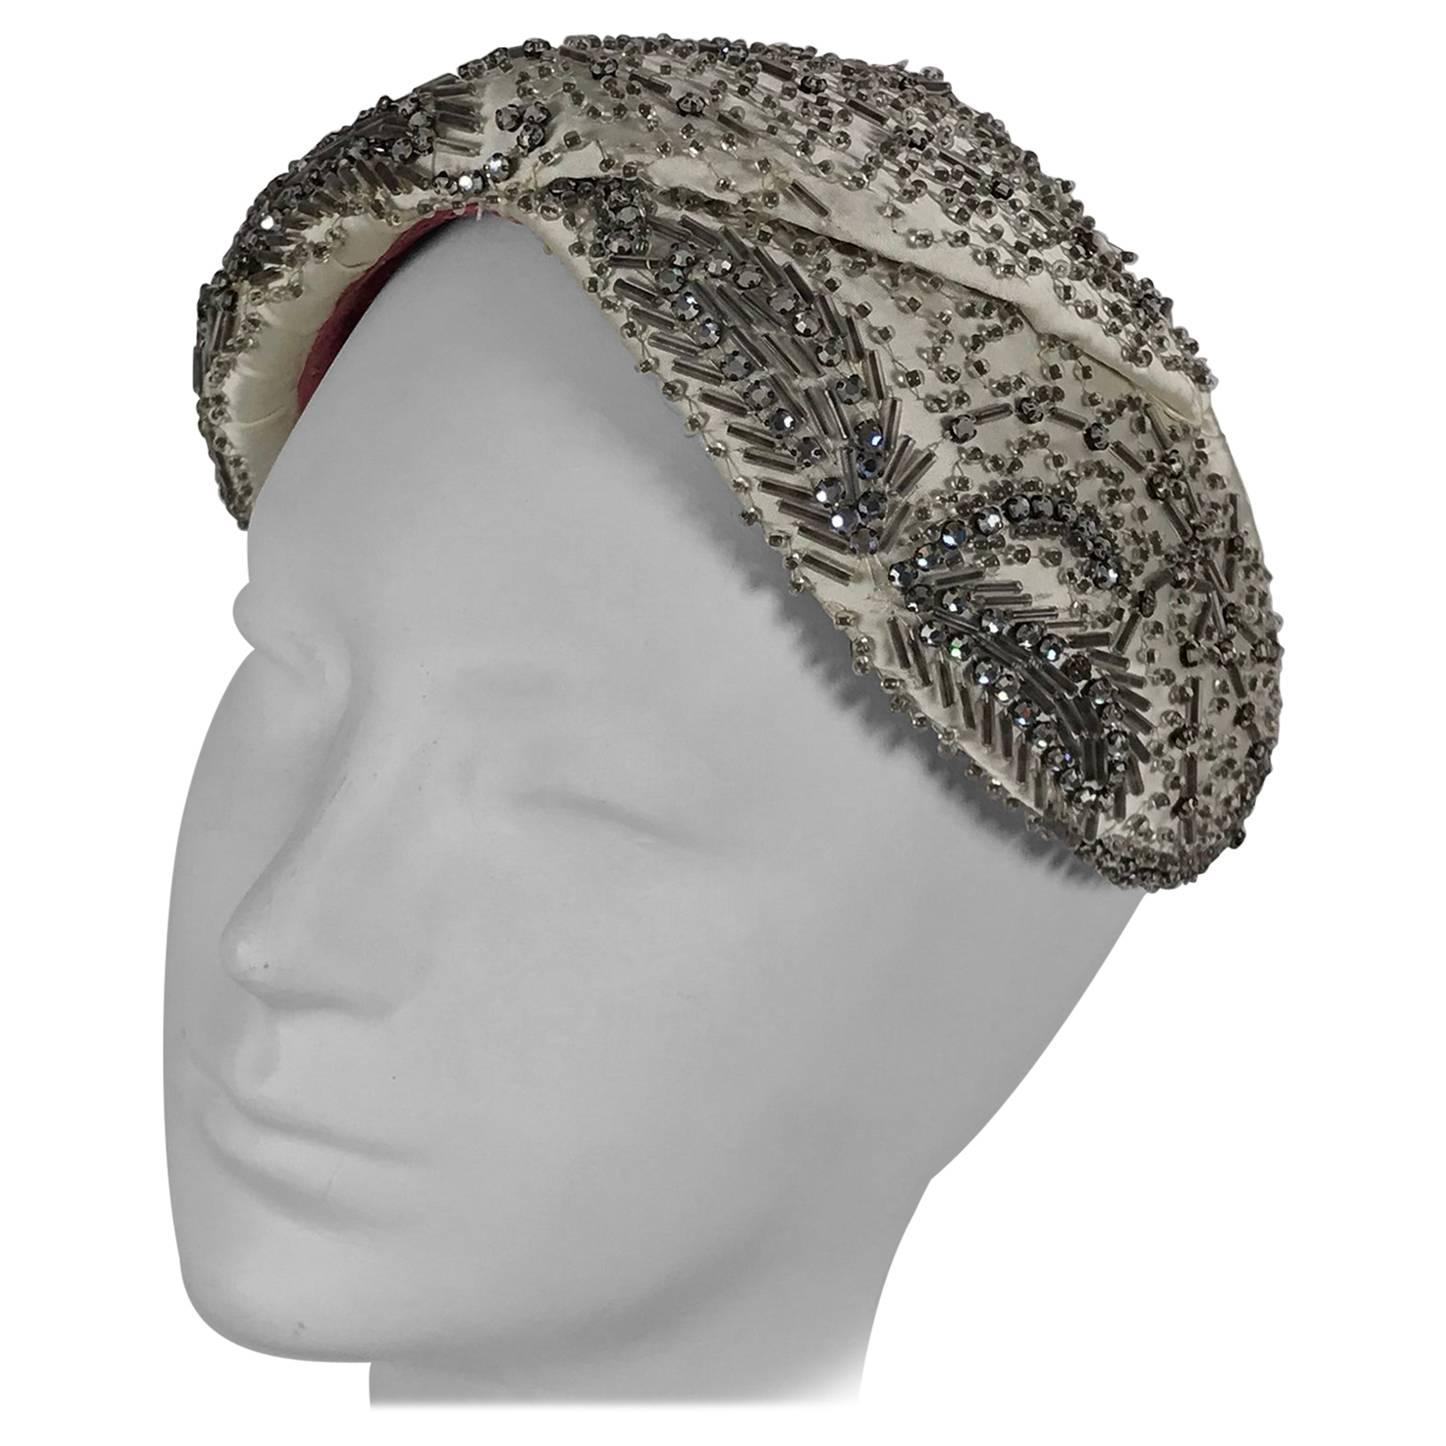 Designed by Lora rhinestone and beaded cocktail hat, 1950s